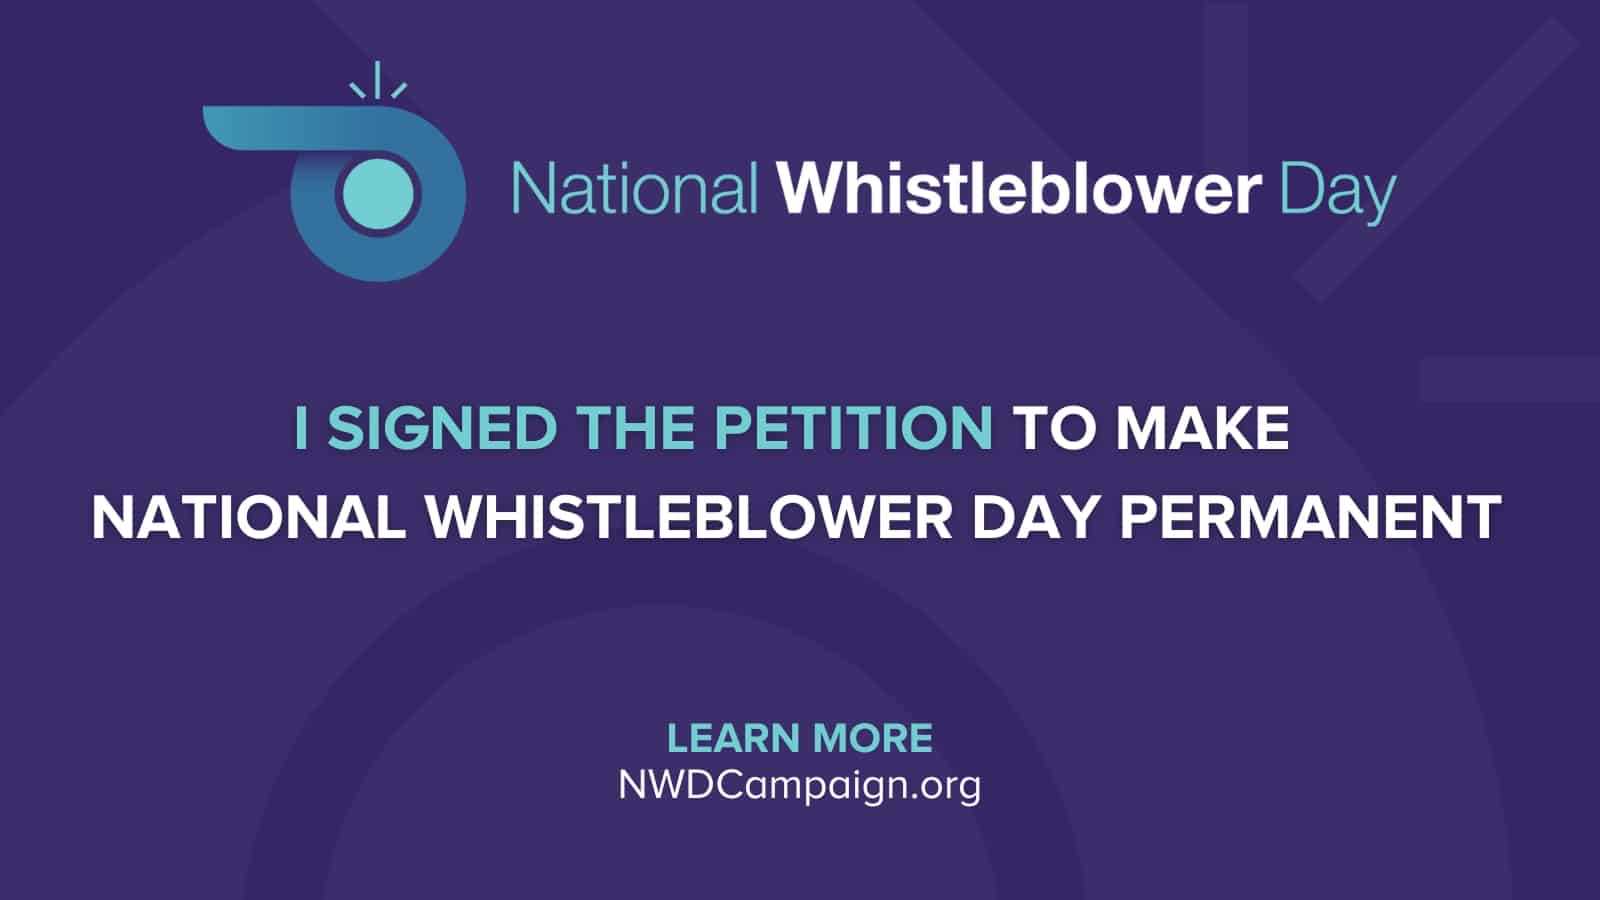 Sign the Petition - Make National Whistleblower Day Permanent